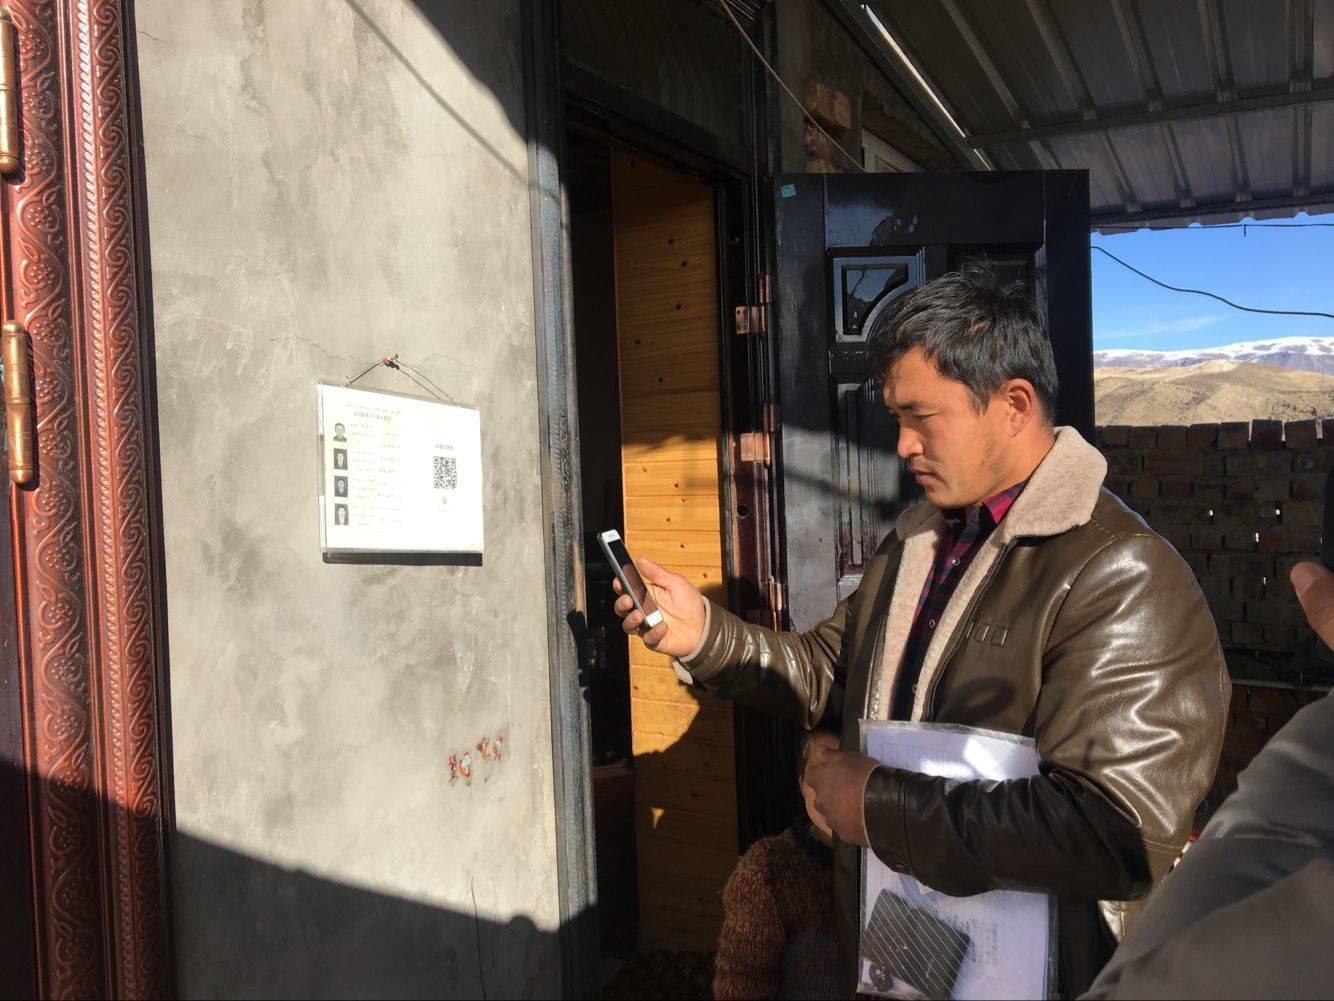 A government official scans the QR code on the wall of a home in Xinjiang, which gives him instant access to the residents’ personal information. 